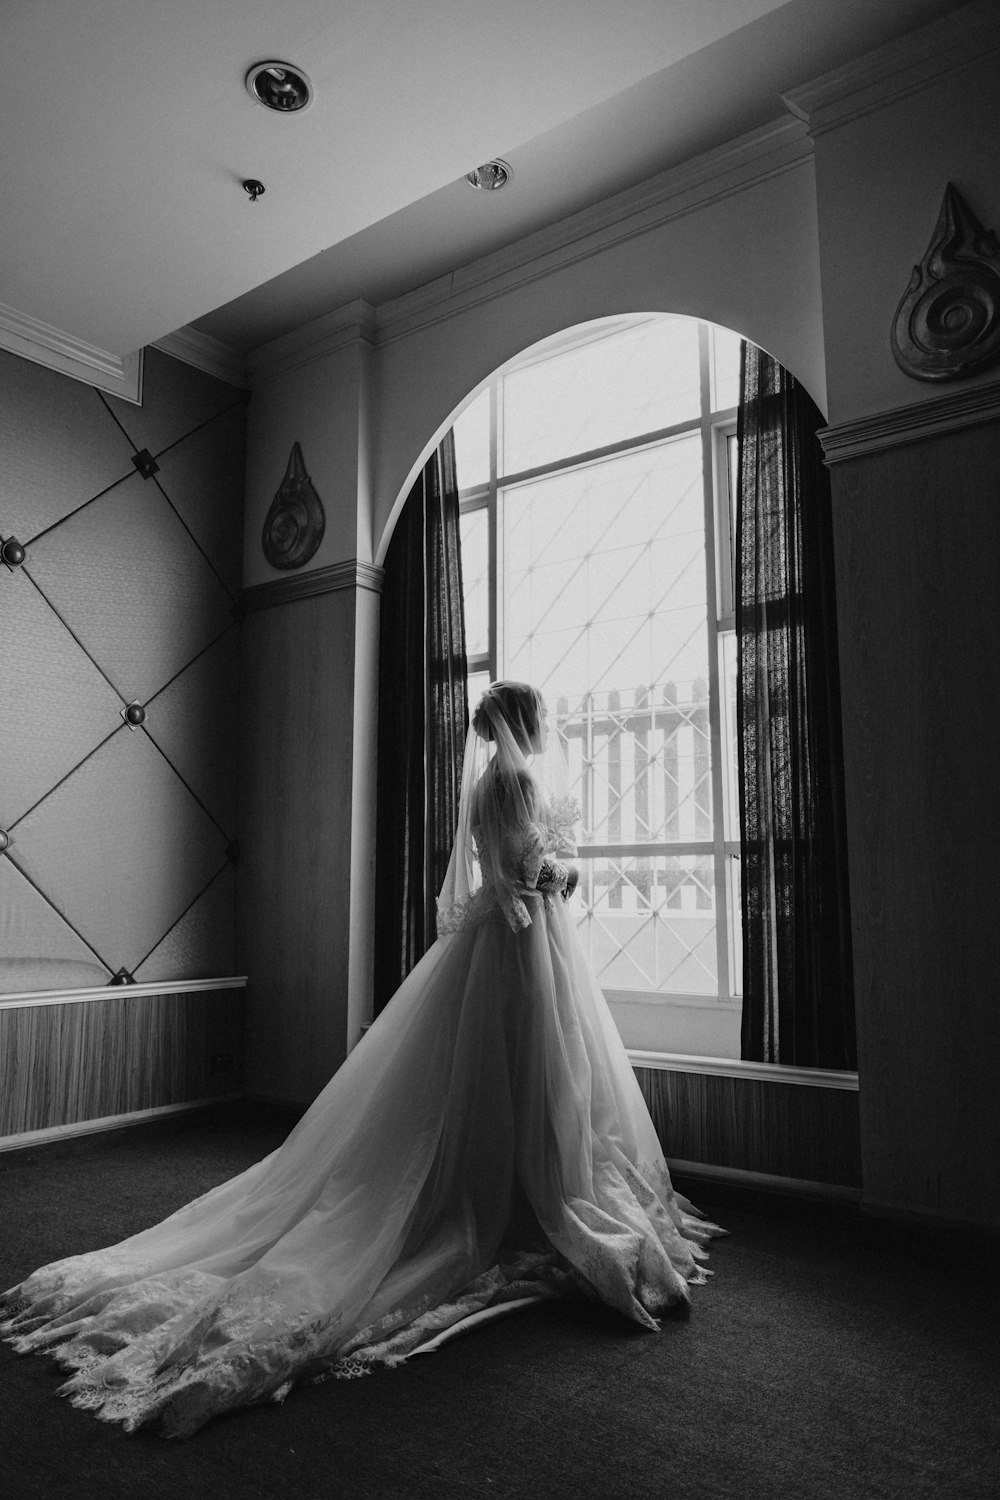 grayscale photo of woman in wedding gown